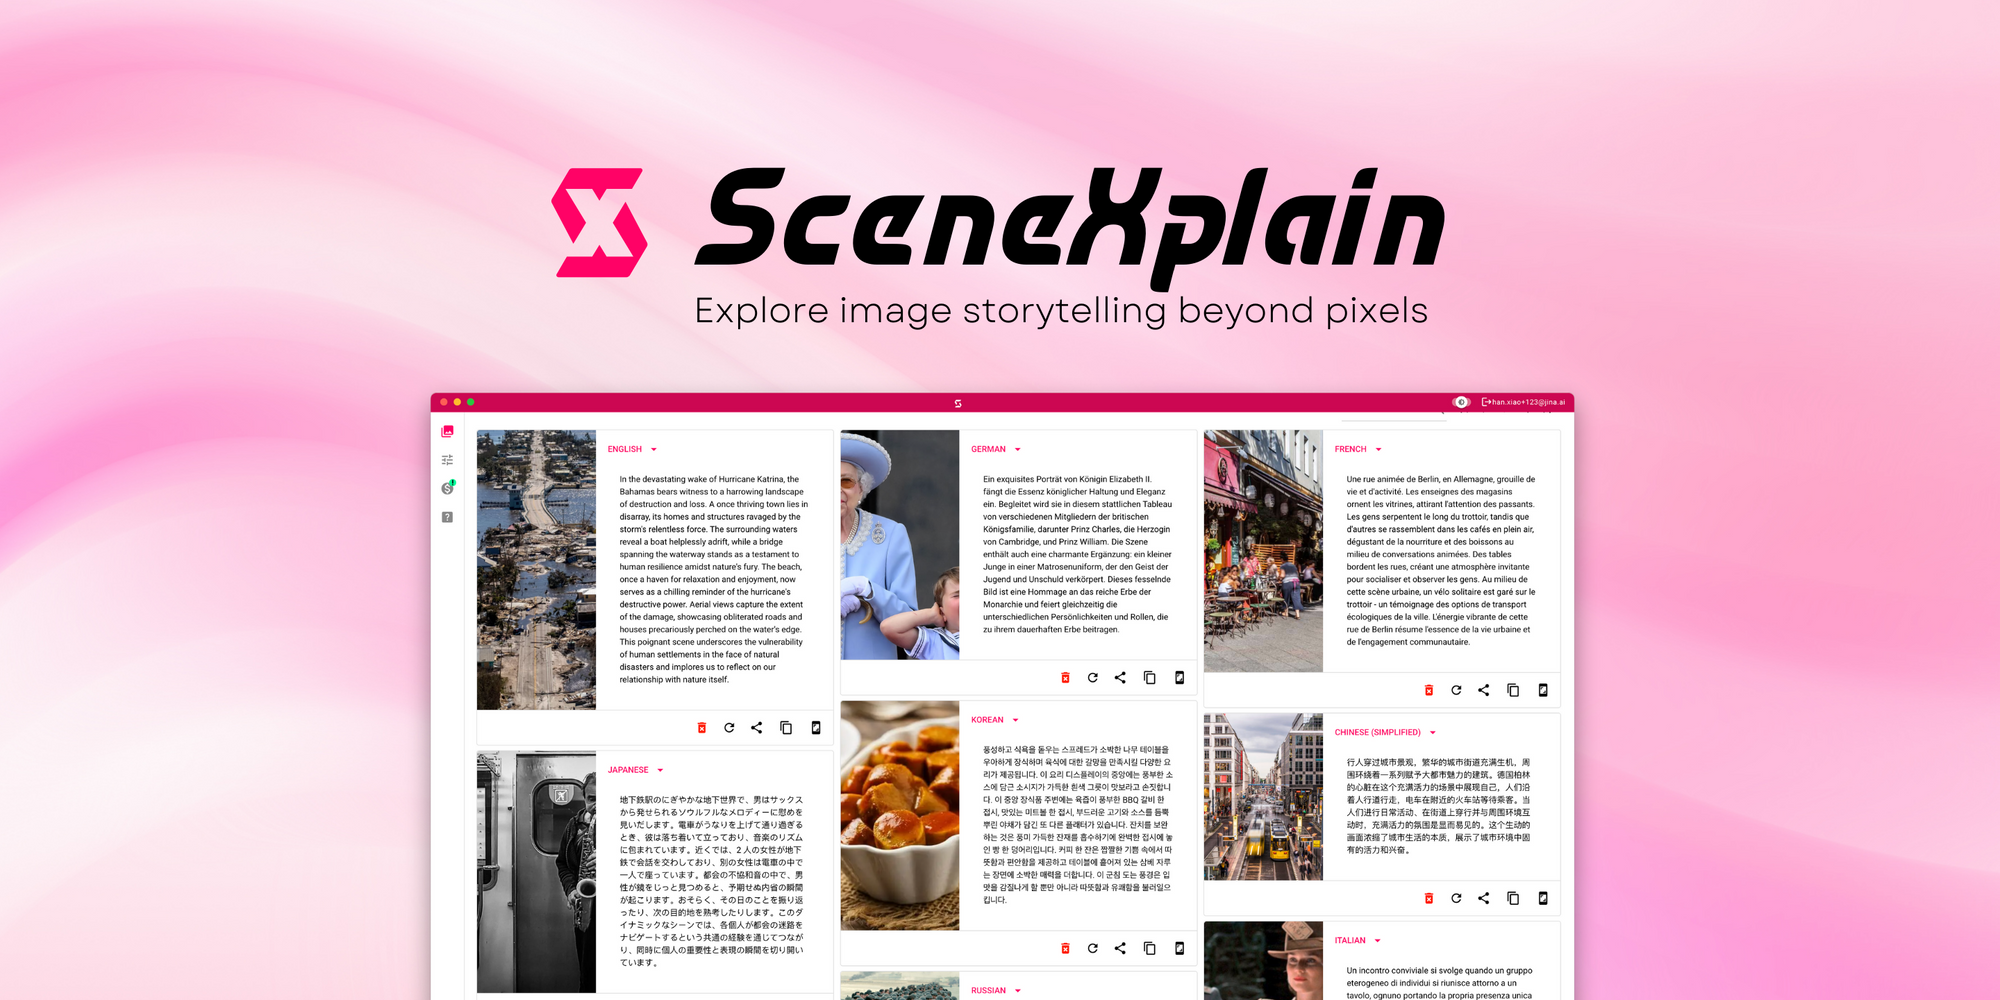 A promotional webpage for the ScanXplain platform, featuring a vibrant layout with a light pink header that includes the platform name in black bold font and a tagline encouraging the exploration of image storytelling beyond pixels. The page showcases an assortment of images and content, creating an inviting and visually engaging experience